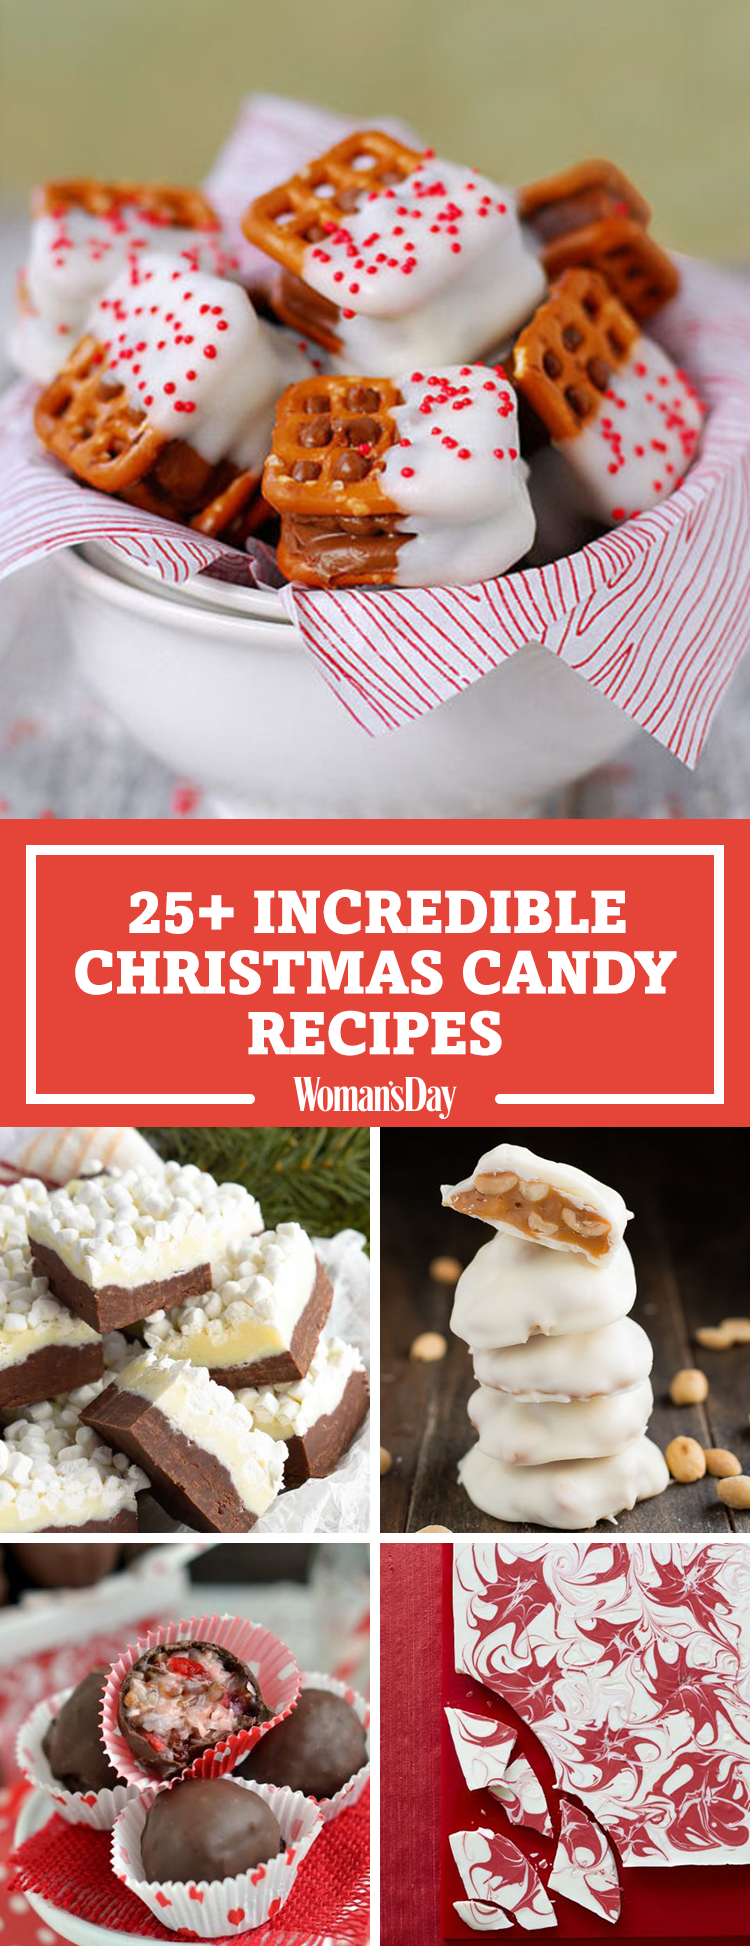 28 Homemade Christmas Candy Recipes How To Make Your Own Holiday Candy